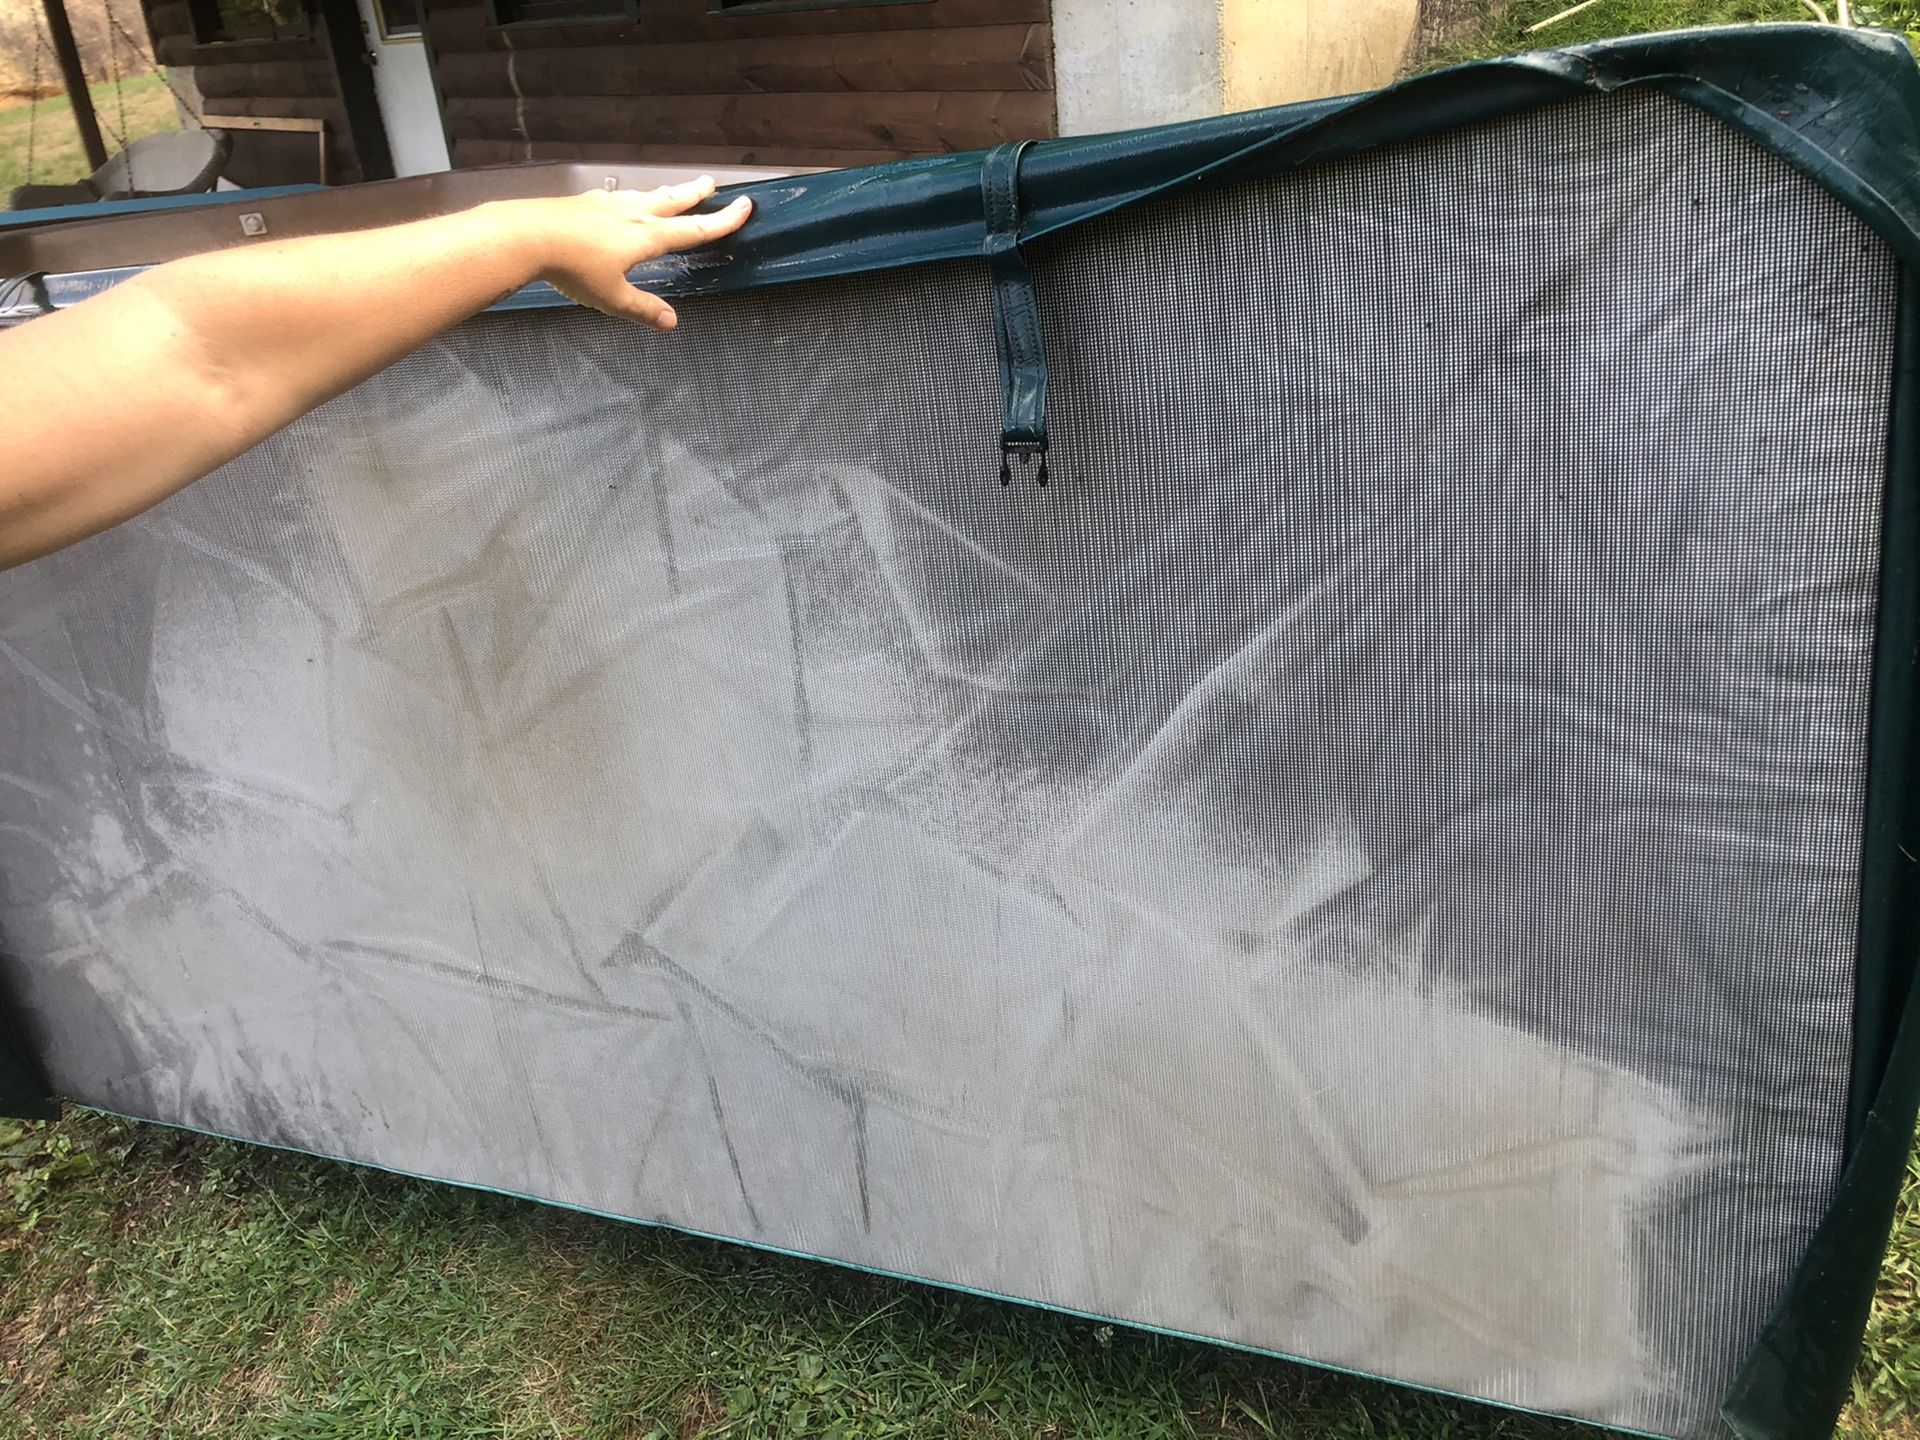 Hot tub cover